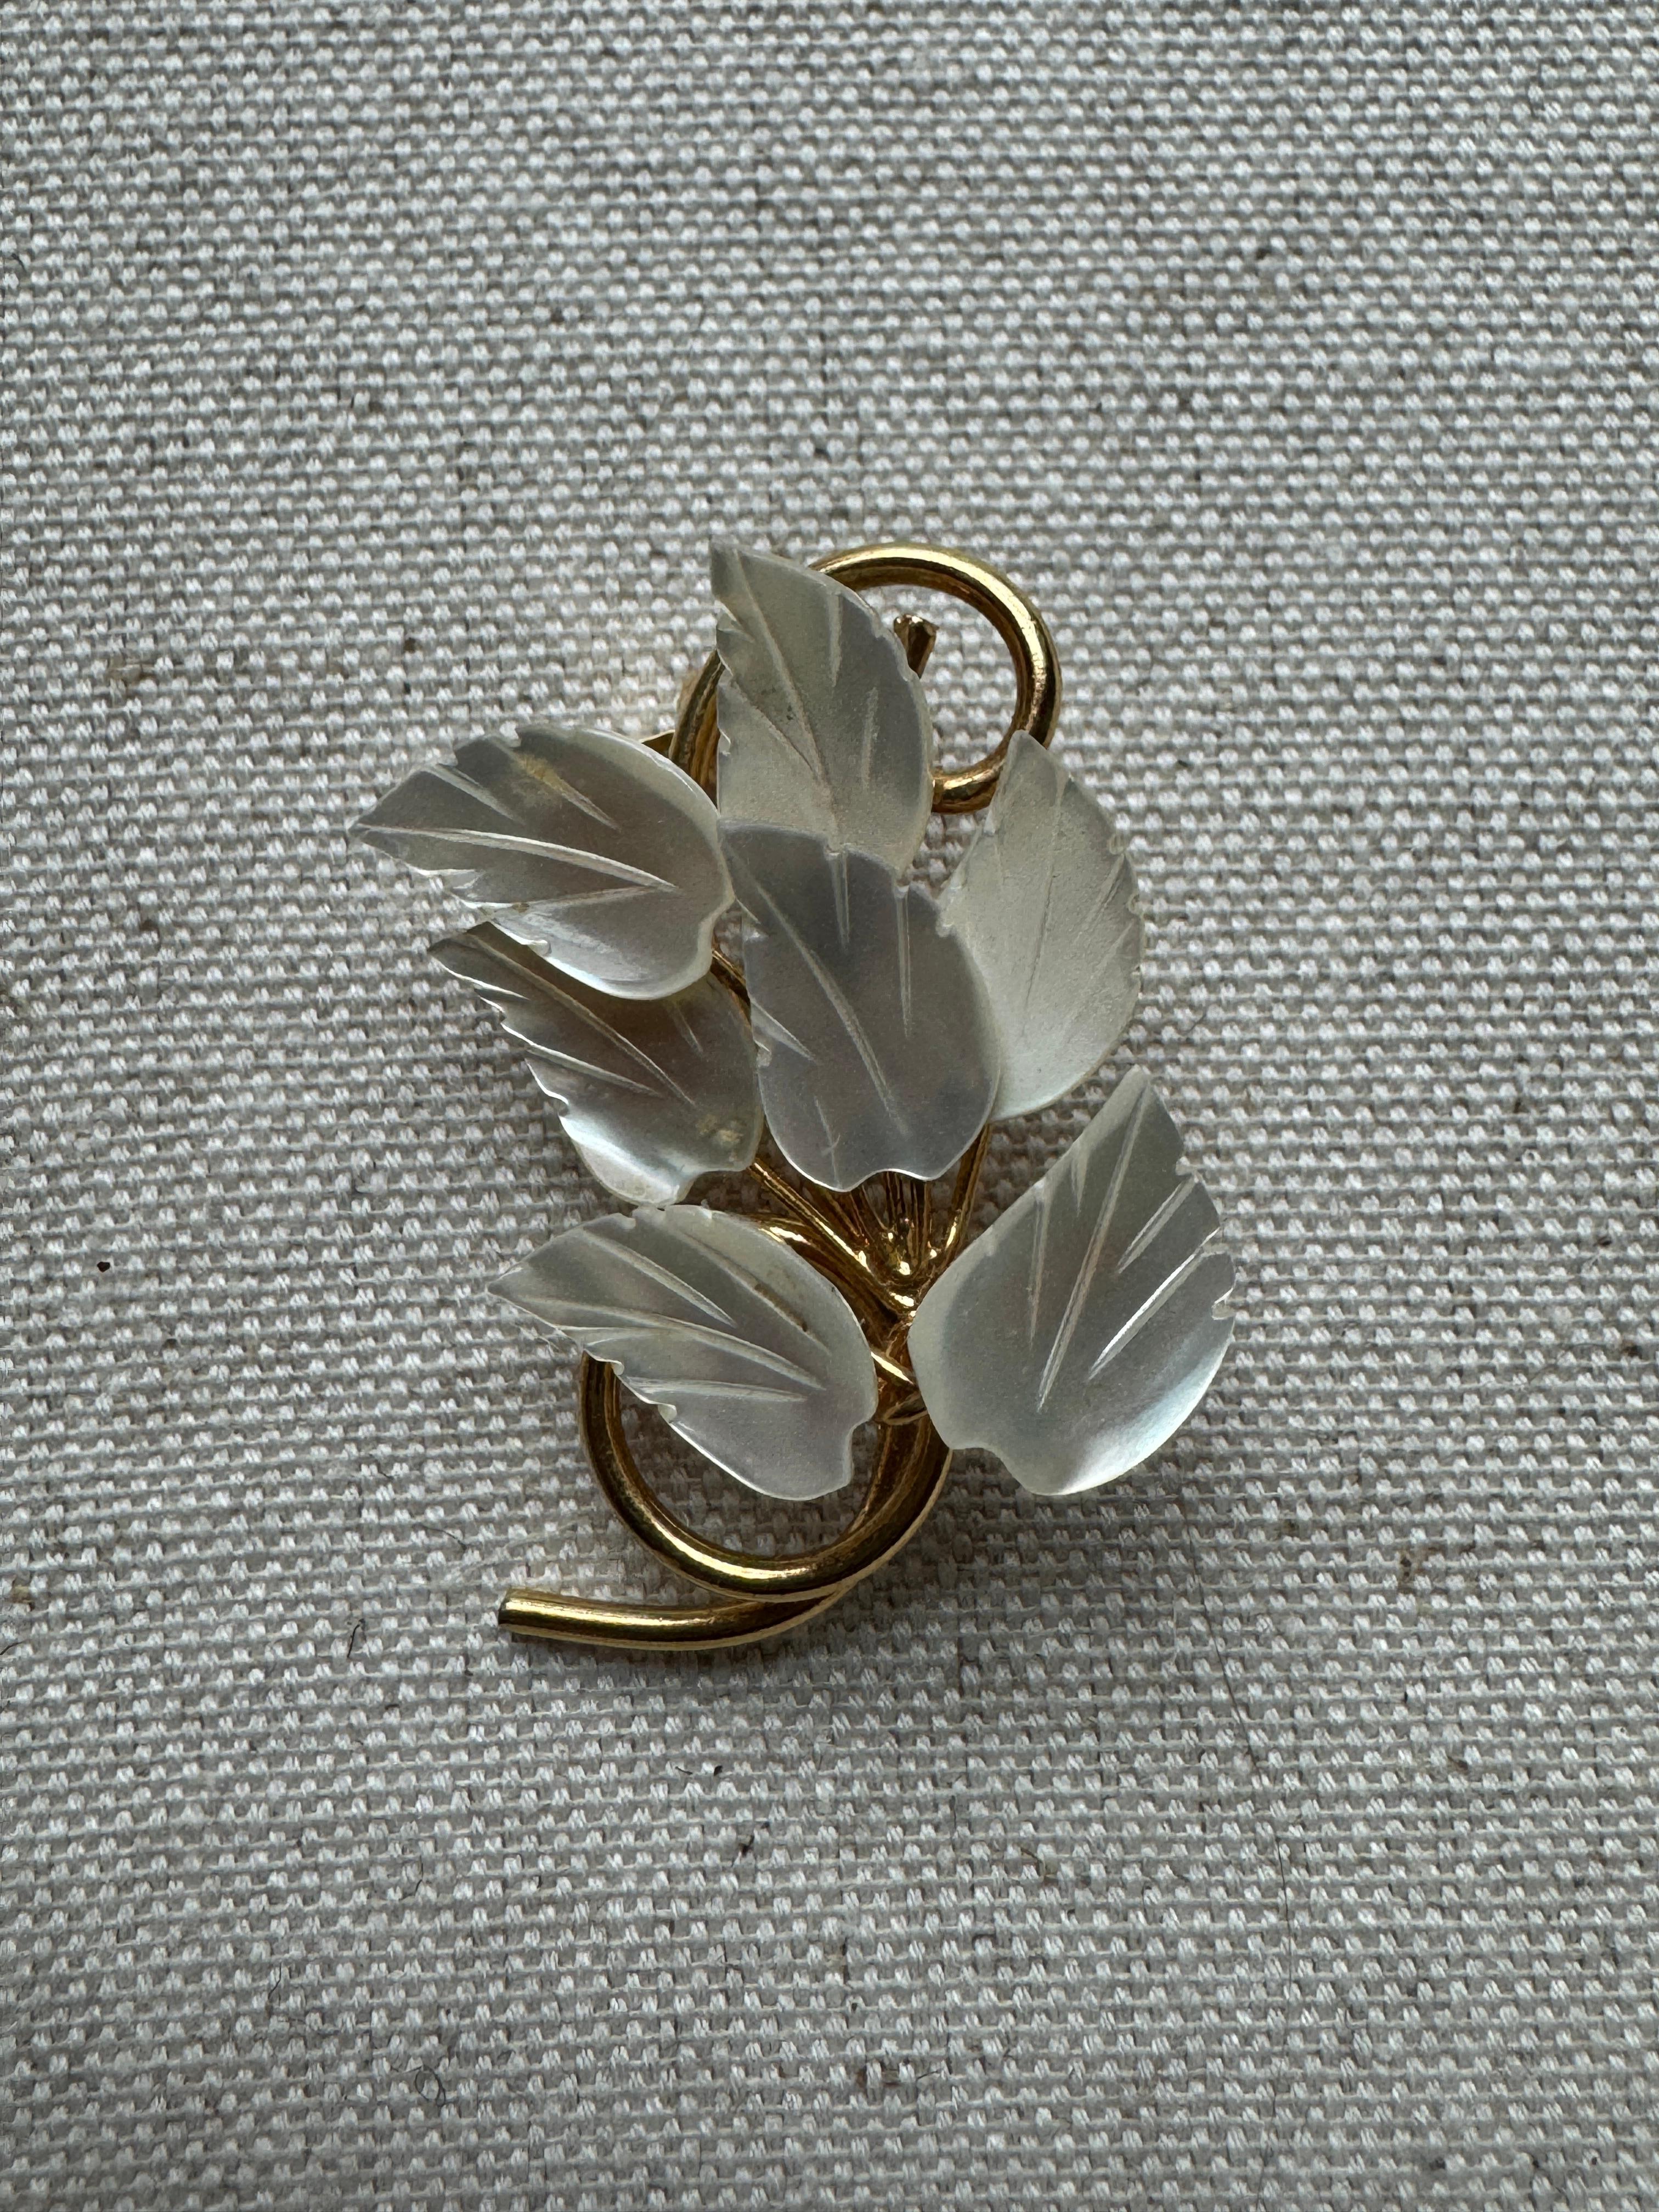 Stunning vintage mother of peal leaf pin in gold plating. Beautiful iridescence colours of green and pink are showcased in he pearls hue. 
Mechanism is strong and works perfectly. This pin is part of the Oiseau Bleu Heirloom Collection. 
